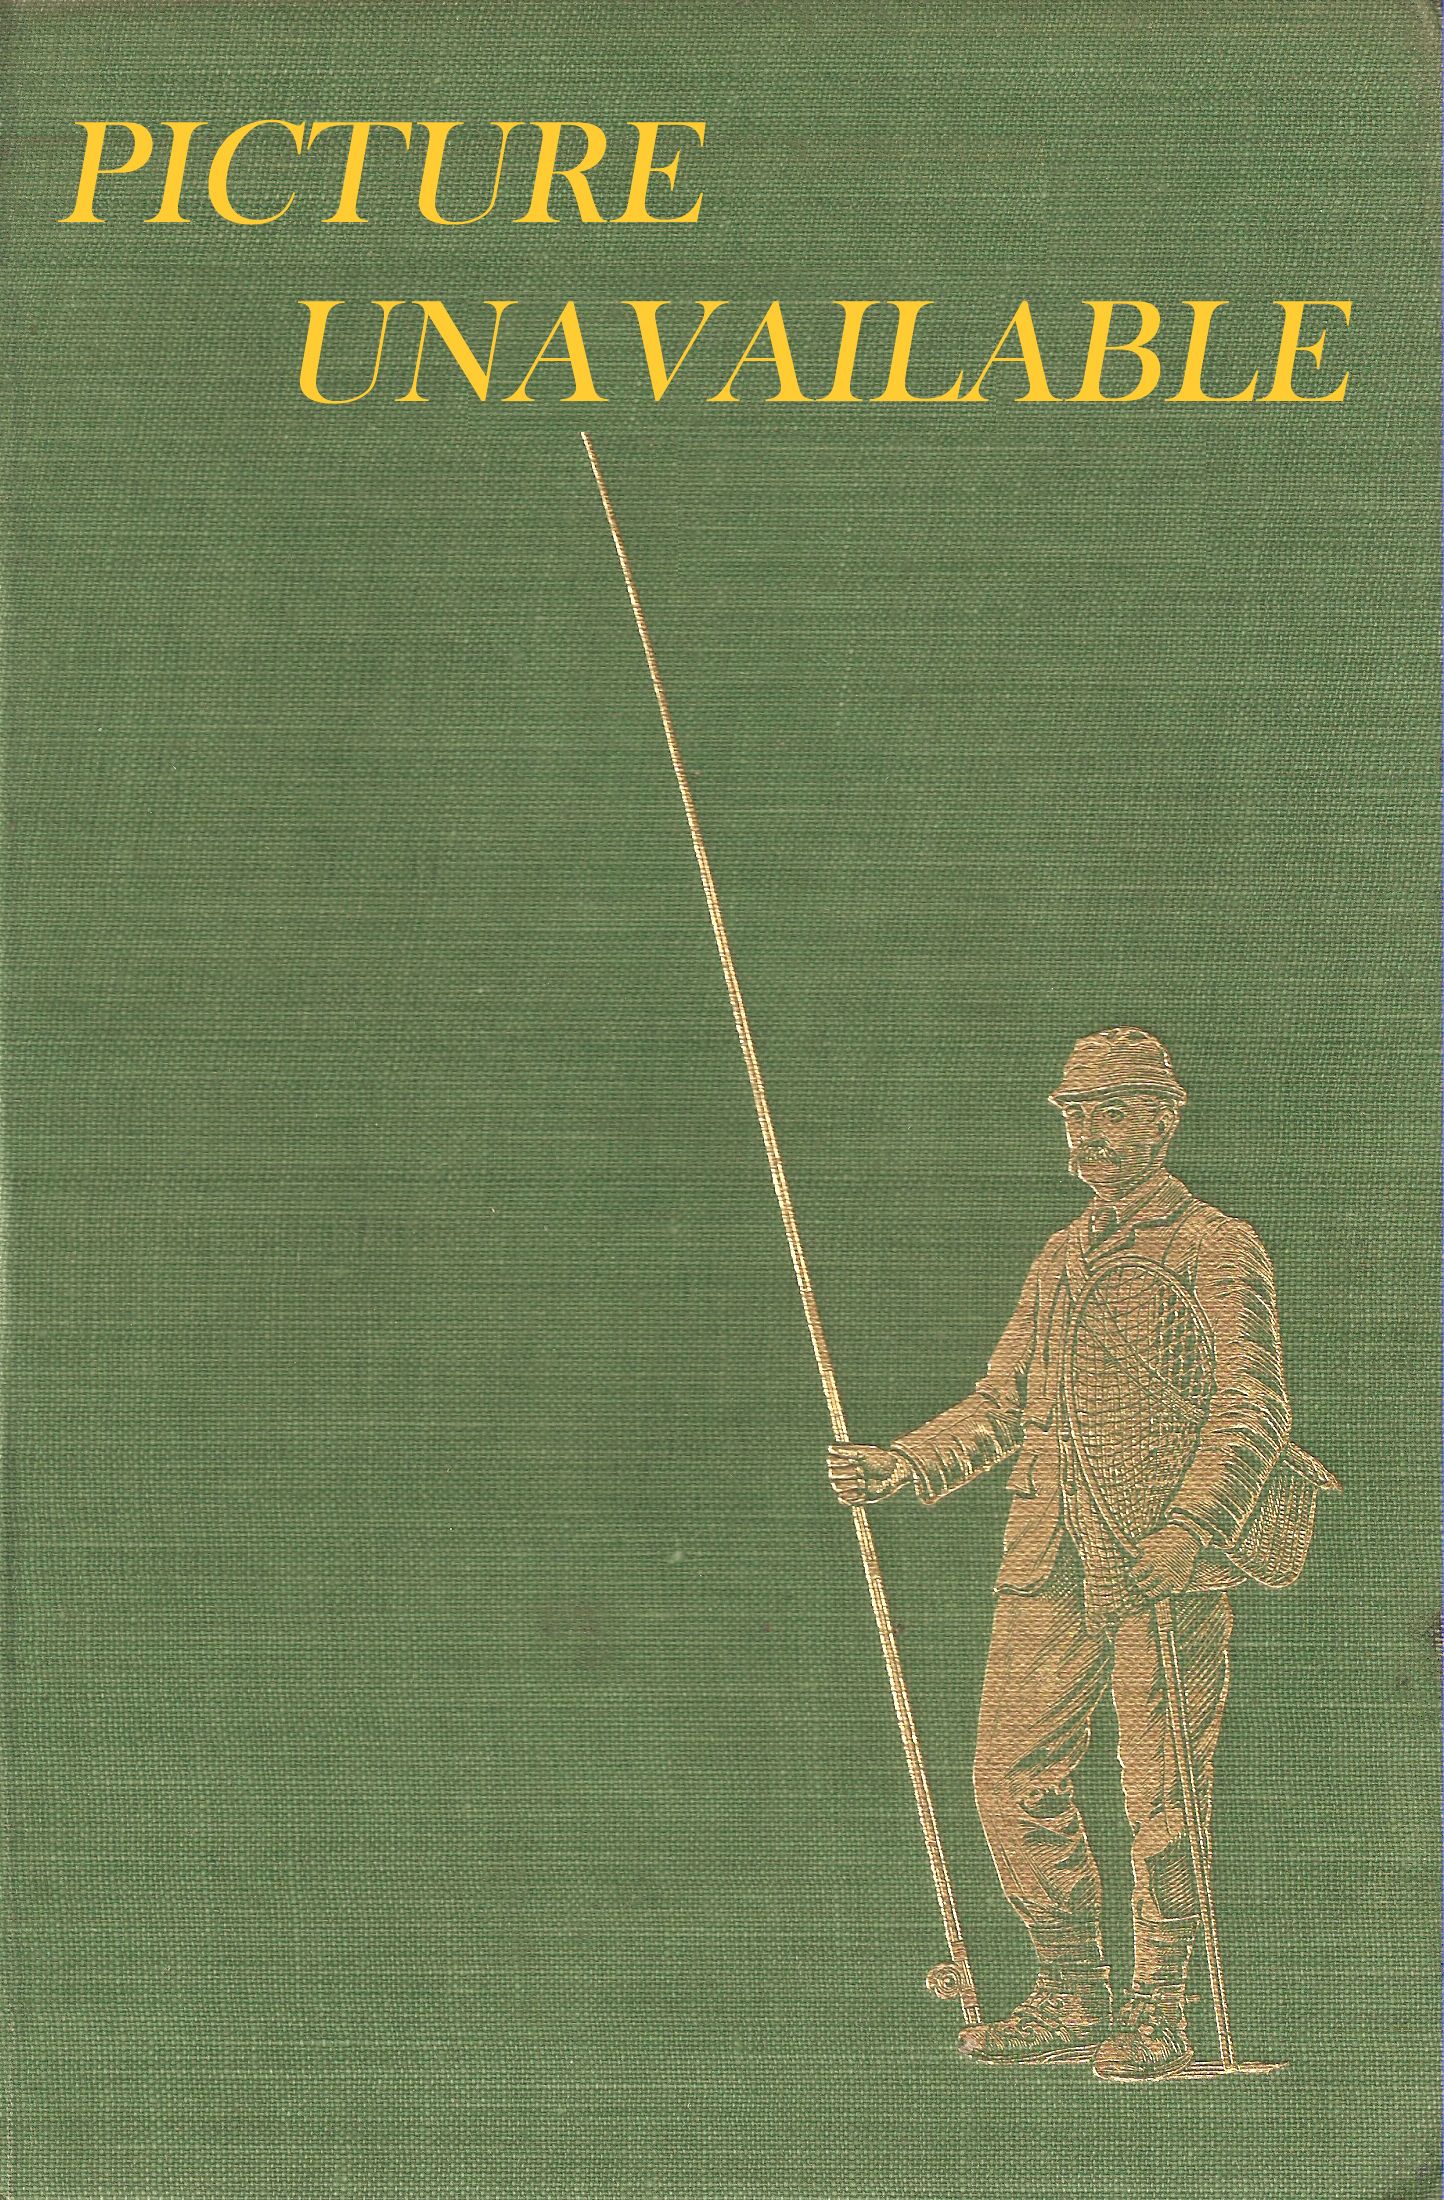 BARBEL: HOW TO CATCH THEM. By S. Donald Stone. Series editor Kenneth  Mansfield. 1955 1st edition.